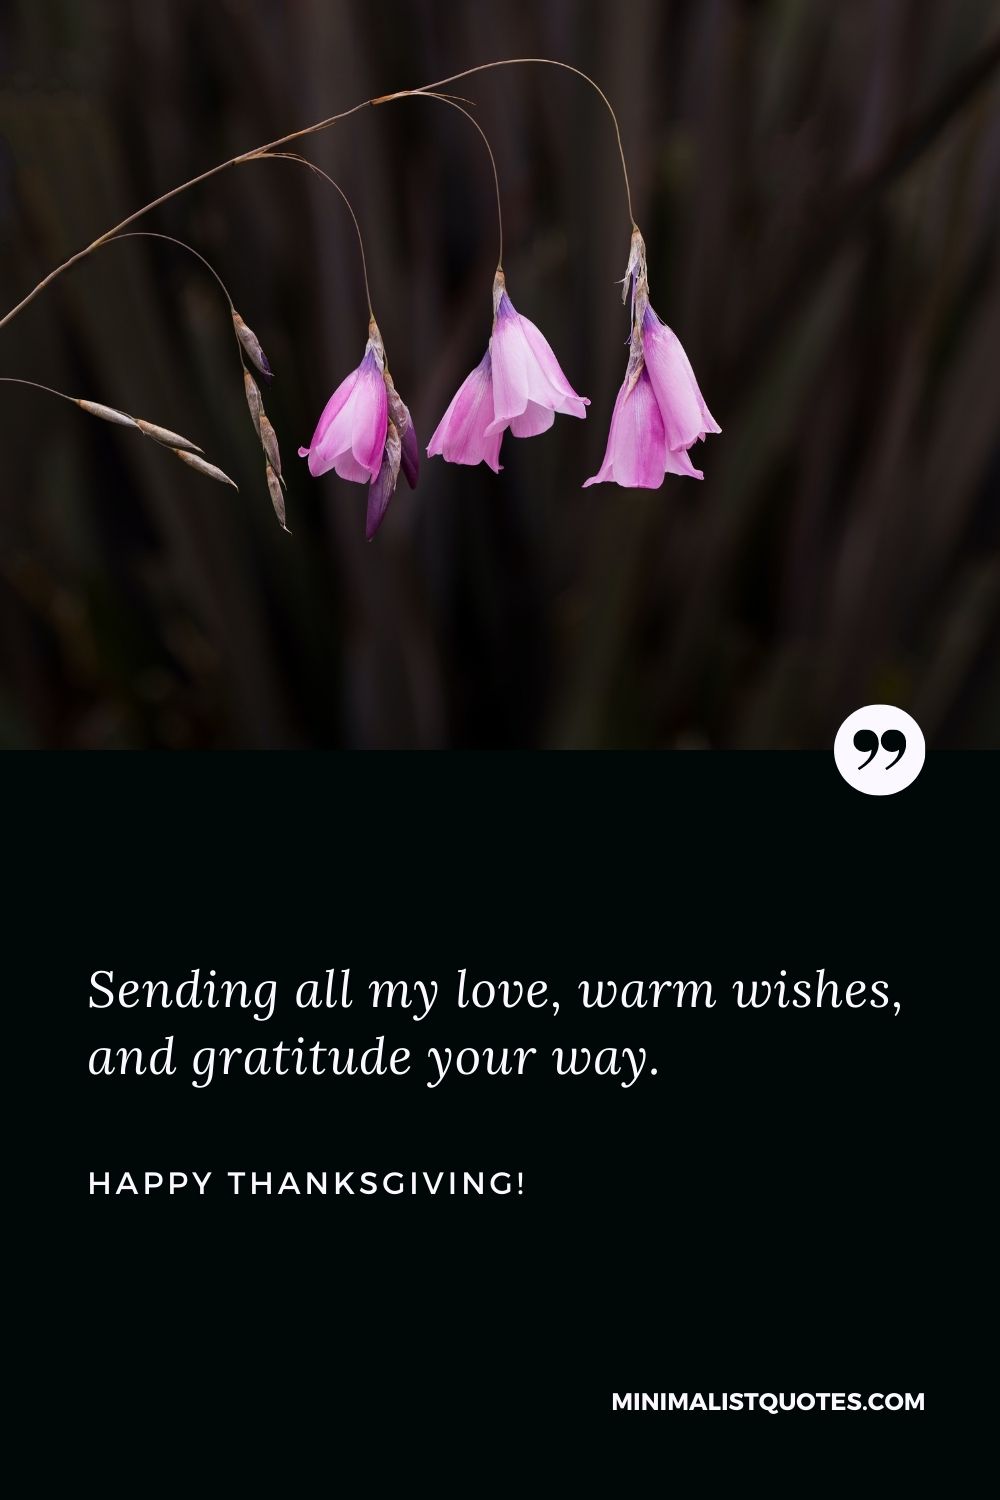 Happy thanksgiving sayings: Sending all my love, warm wishes, and gratitude your way. Happy Thanksgiving!